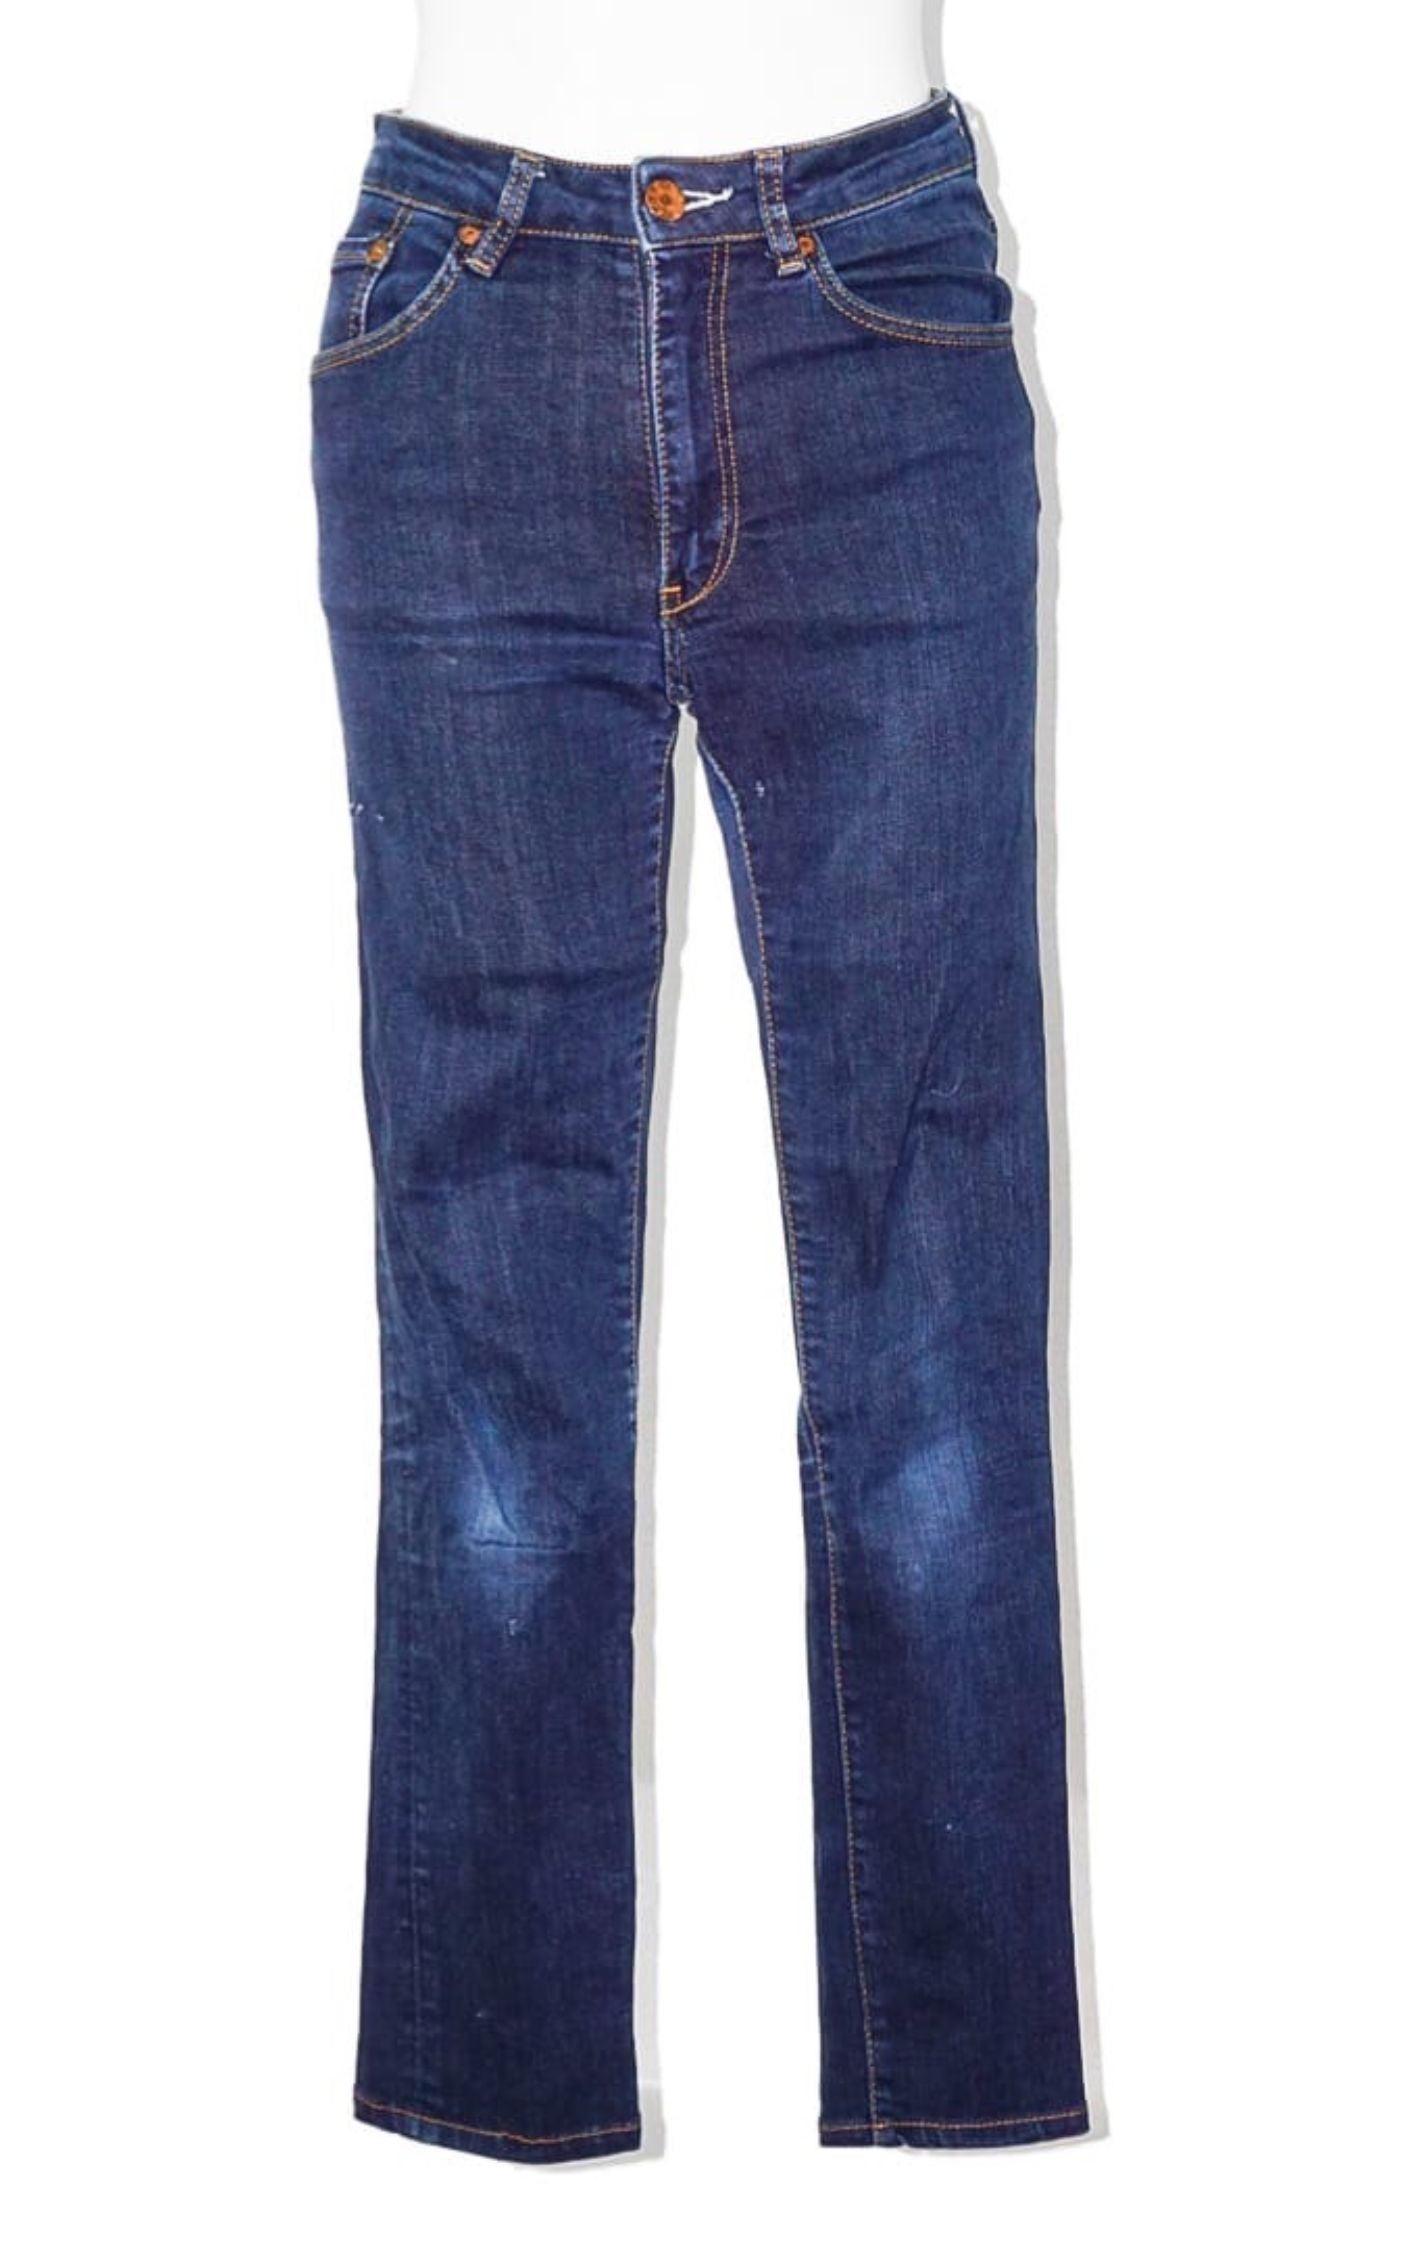 ACNE STUDIOS High Waisted Skinny Jeans resellum